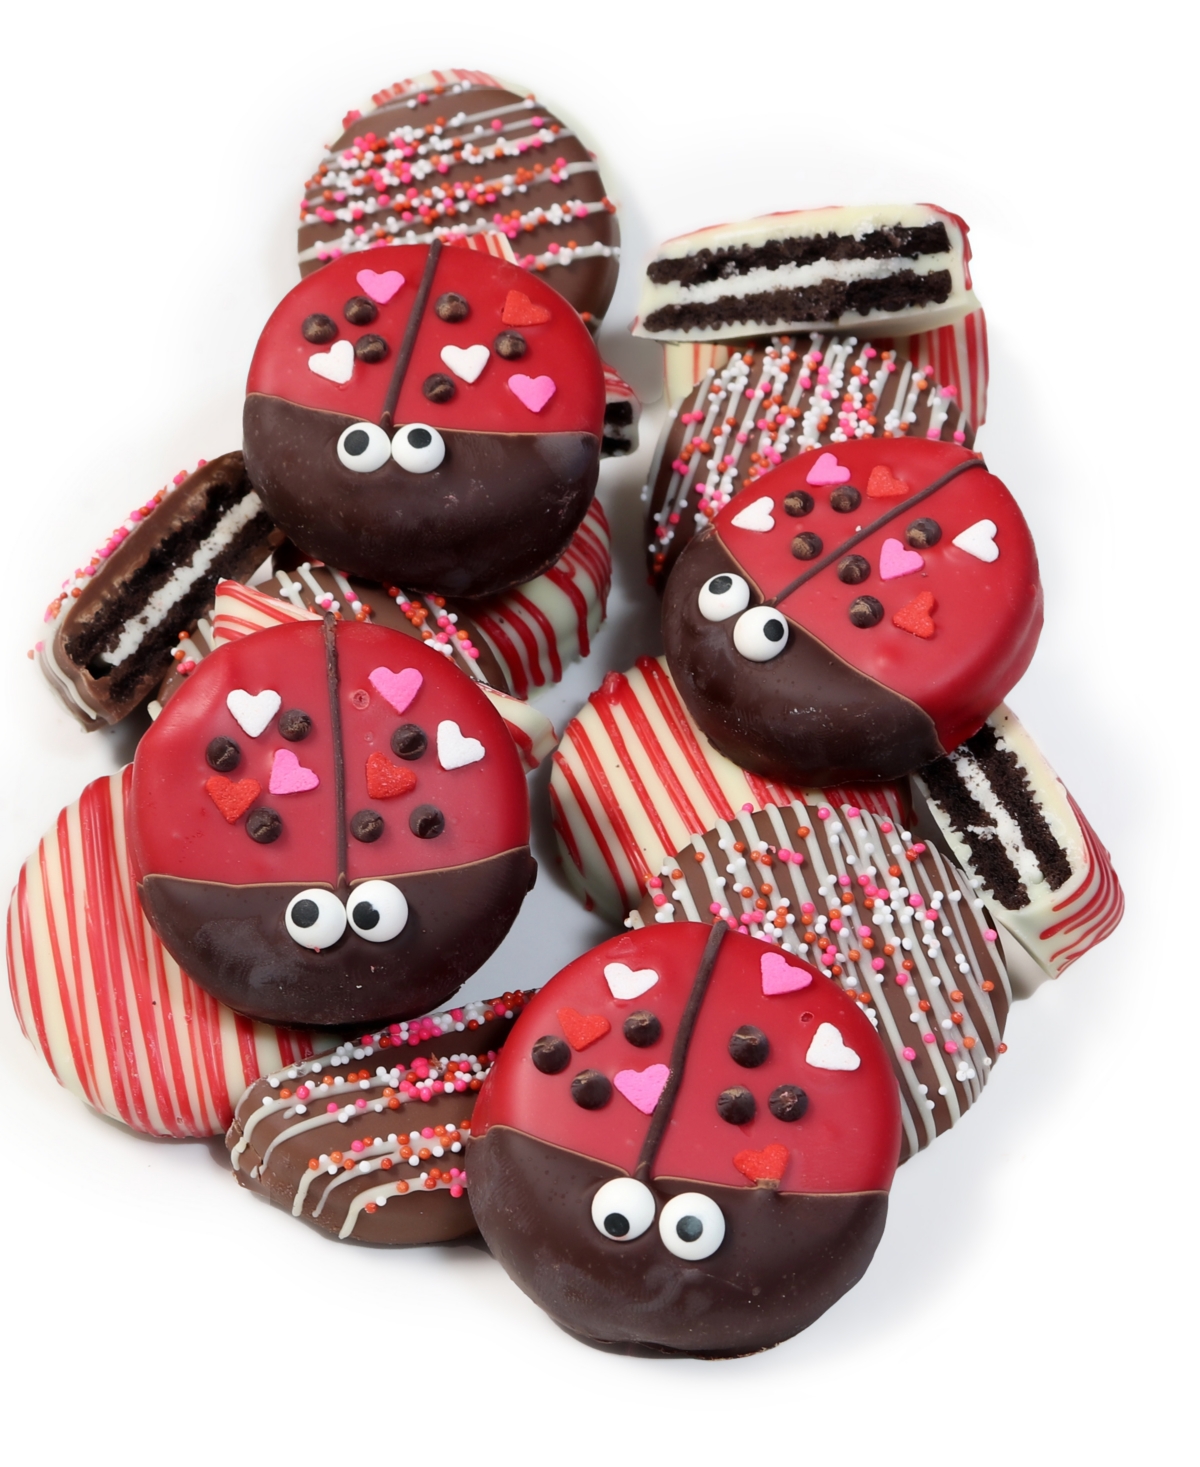 Chocolate Covered Company Love Bug Belgian Chocolate Covered Oreo Cookies In No Color